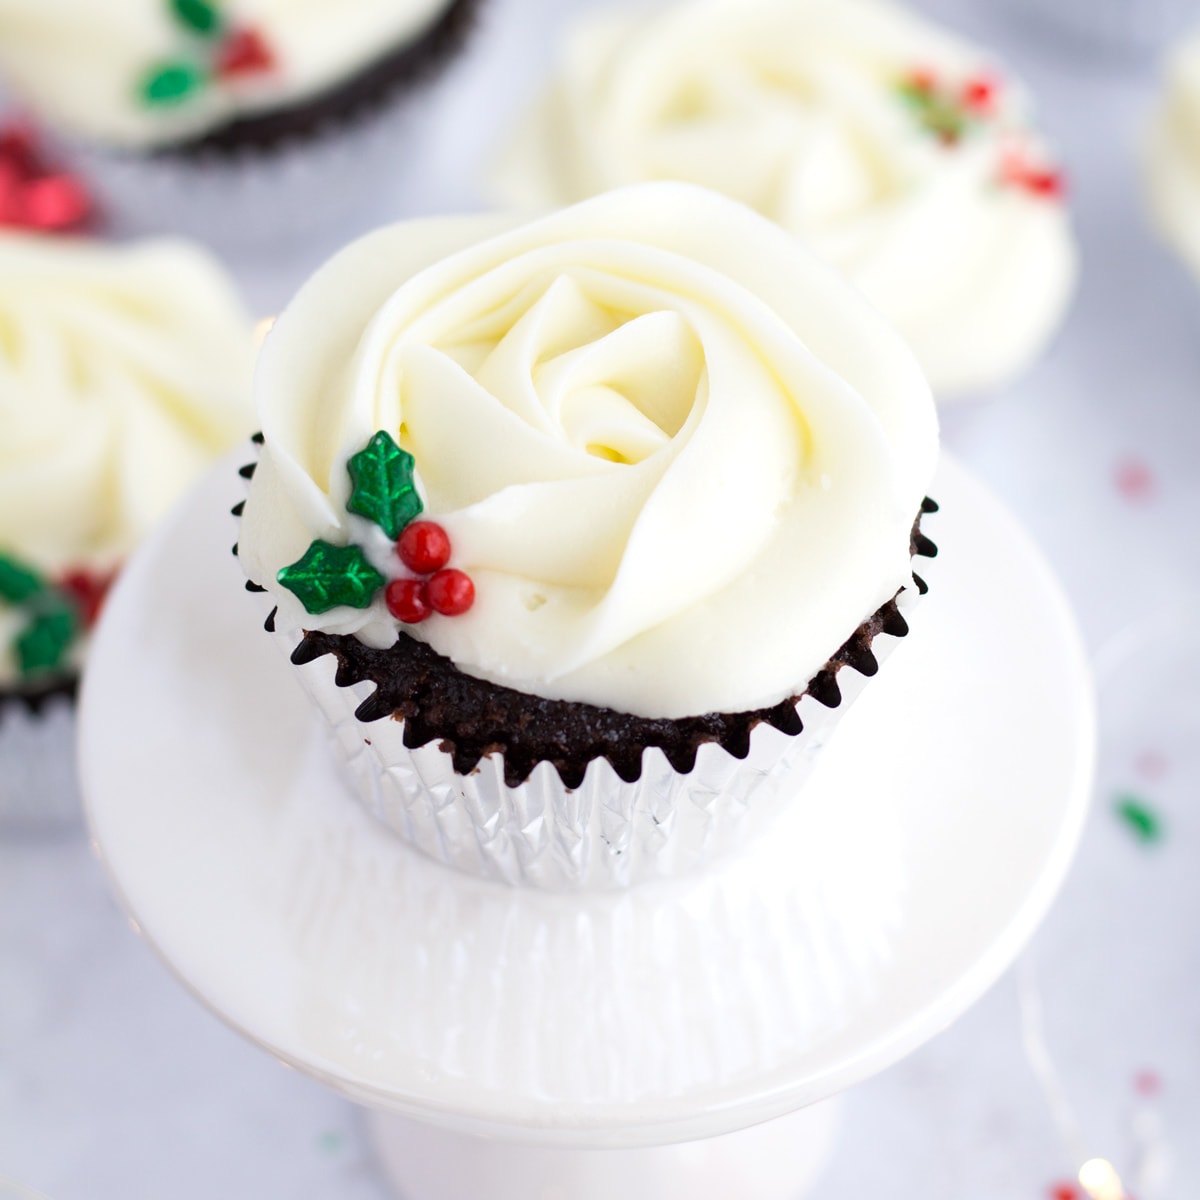 Christmas Cake decorating – Tips & 25 Ideas for Icing the Cake